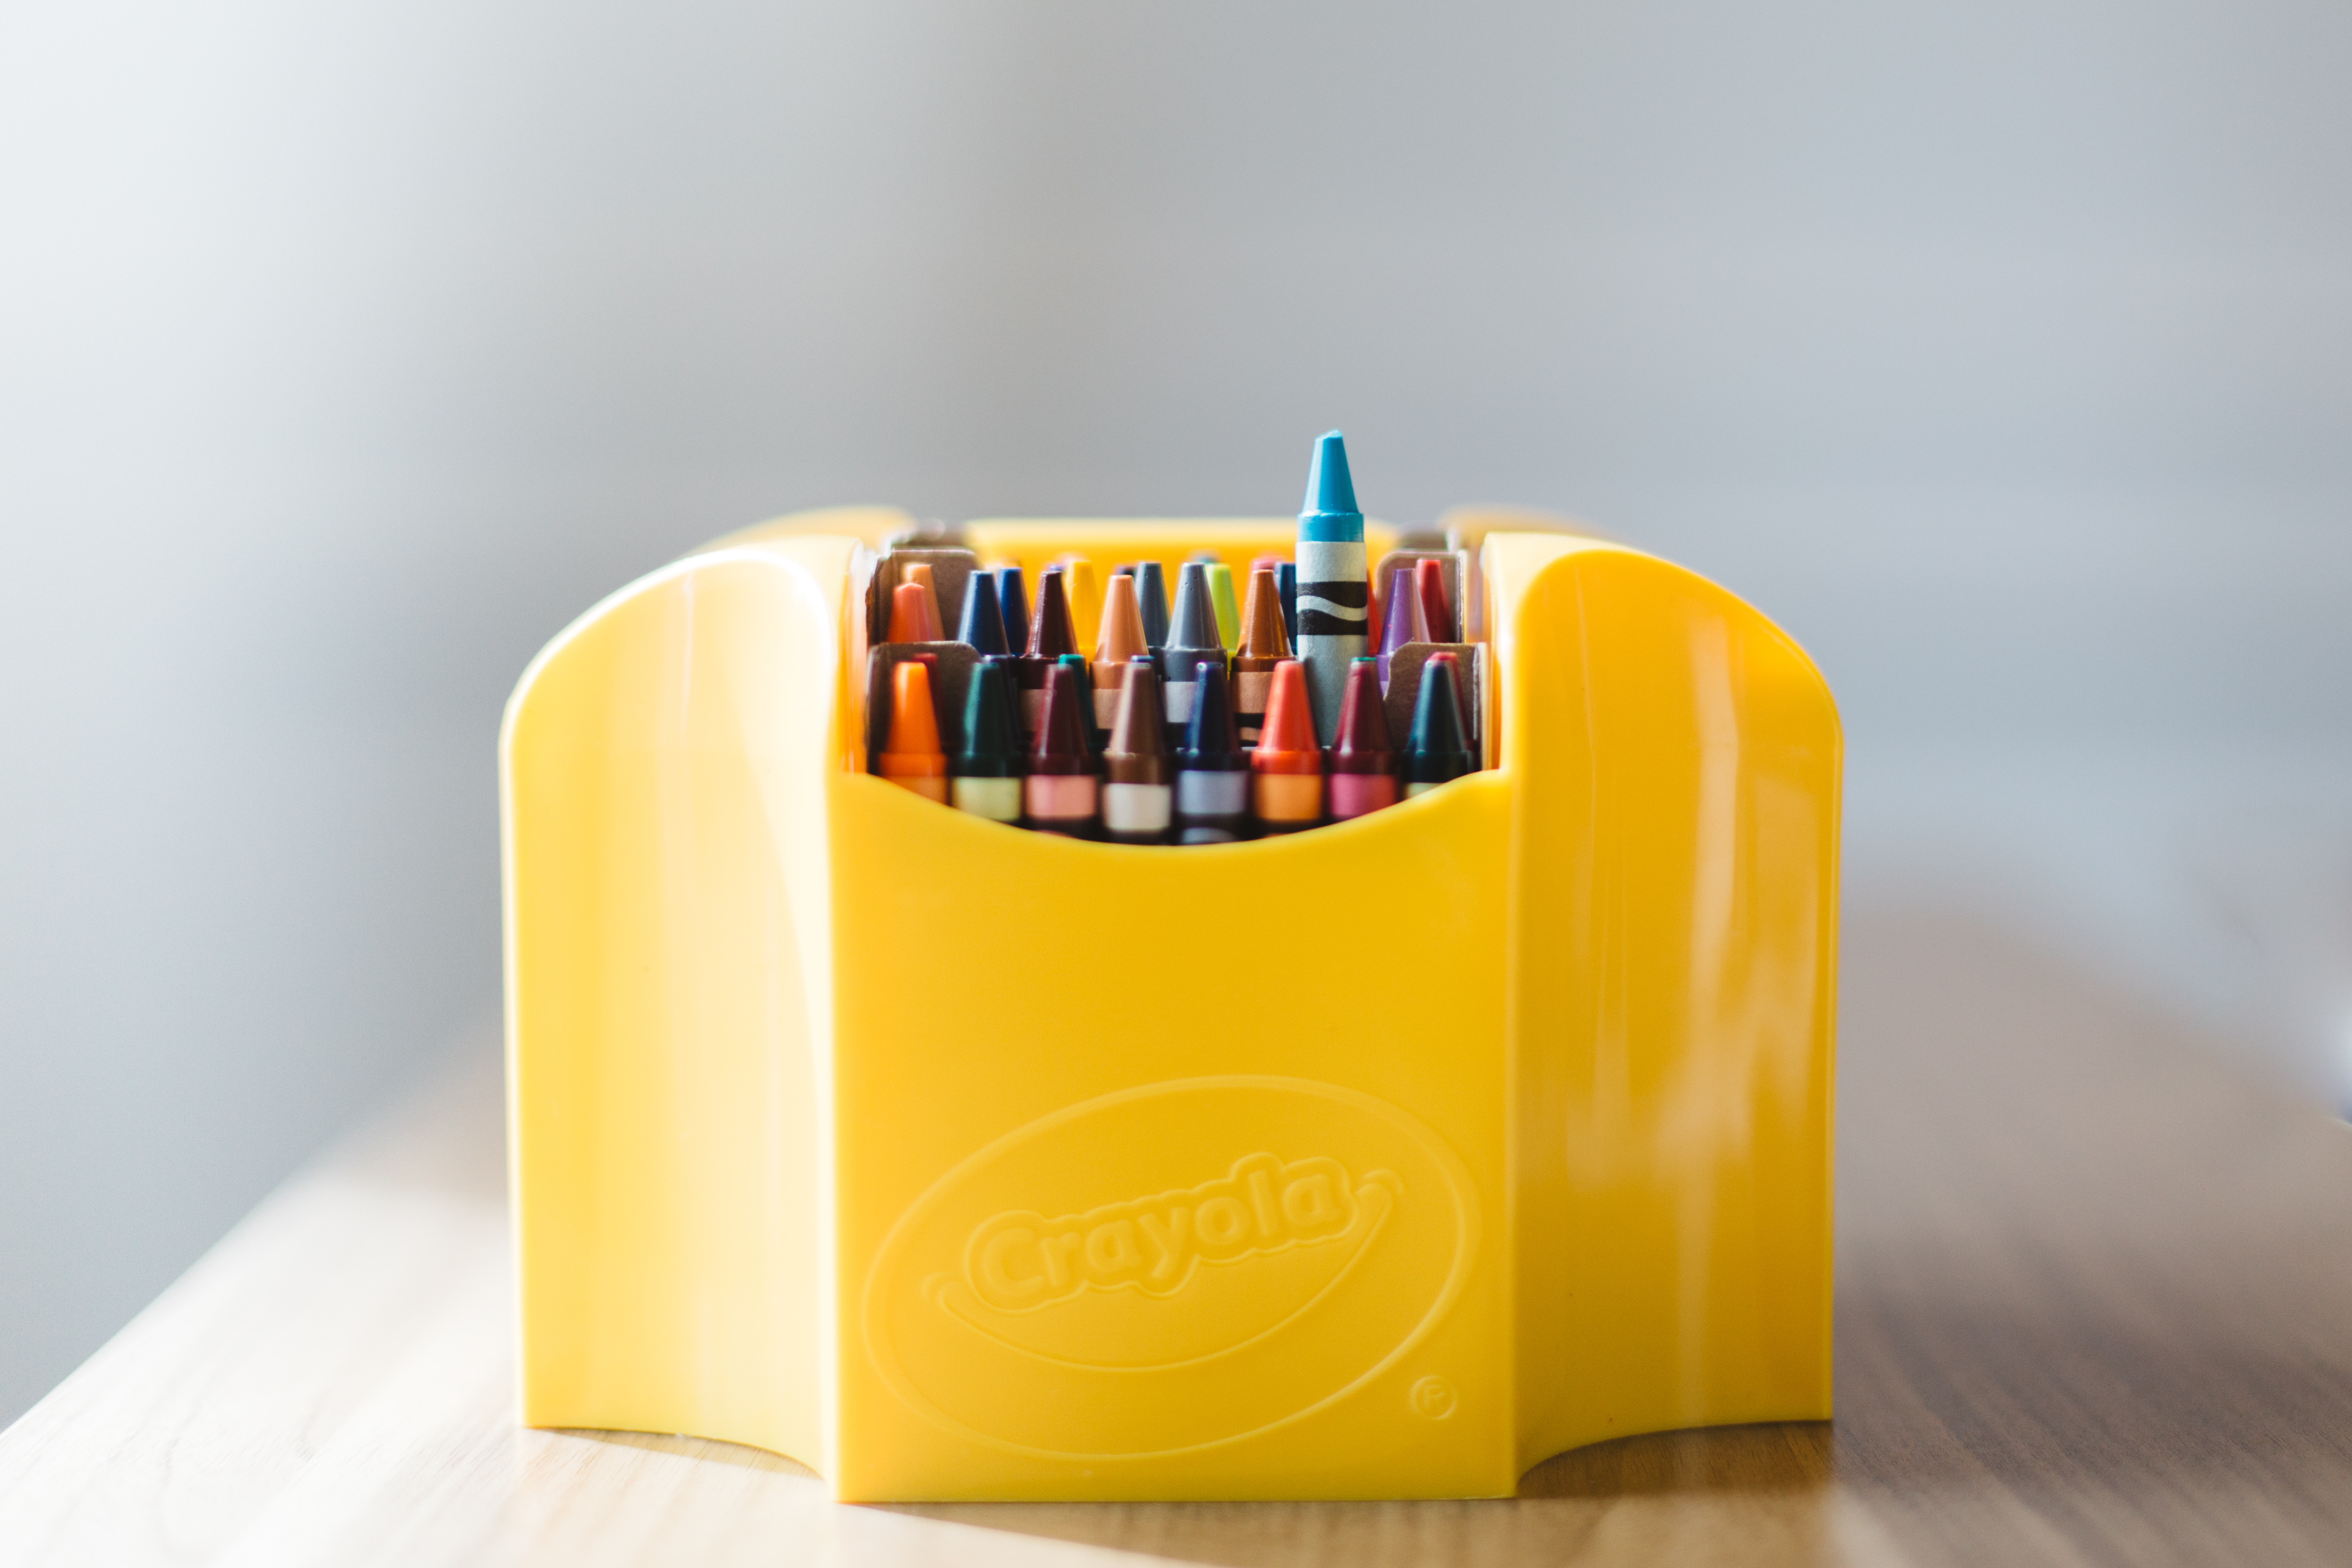 Yellow Crayola crayon holder with tons of colorful crayons inside